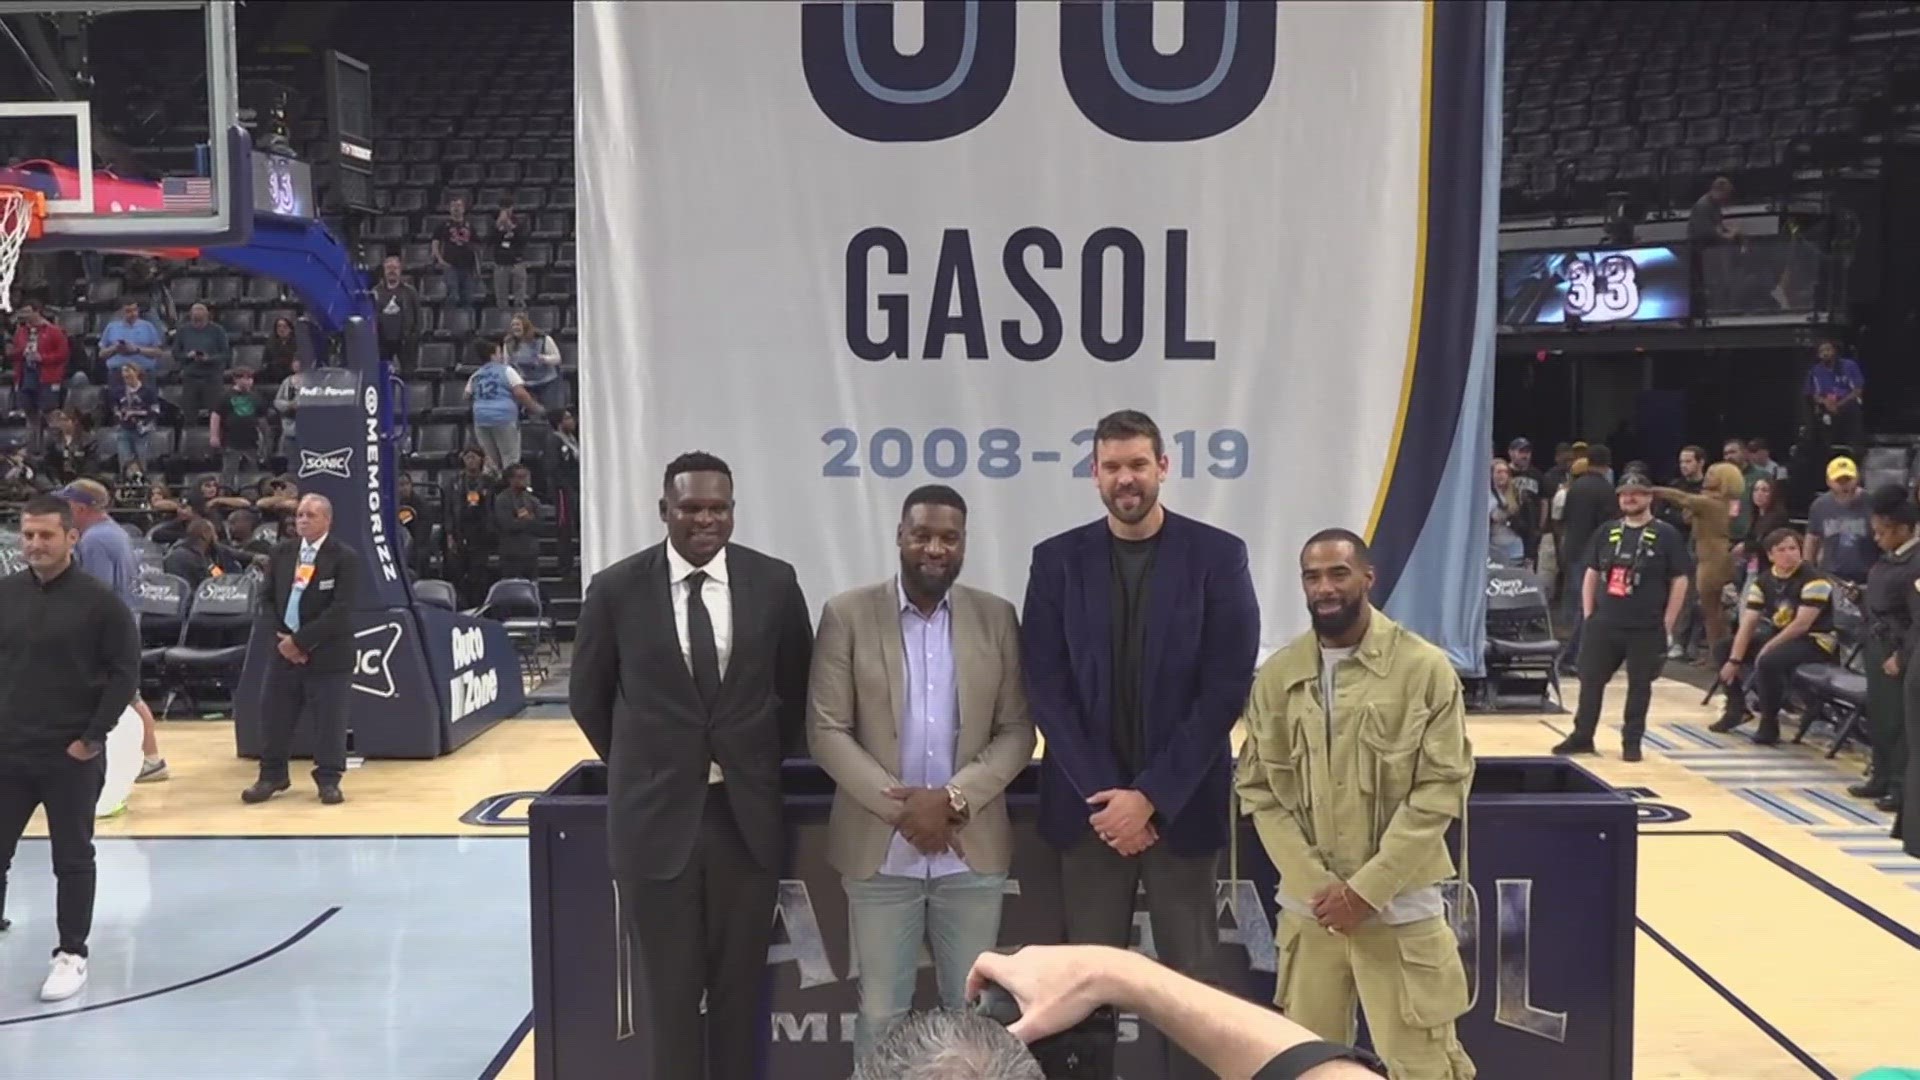 Marc Gasol reunited with teammates, Tony Allen, Zach Randolph and Mike Conley for the first time since 2017 during his #33 jersey retirement.